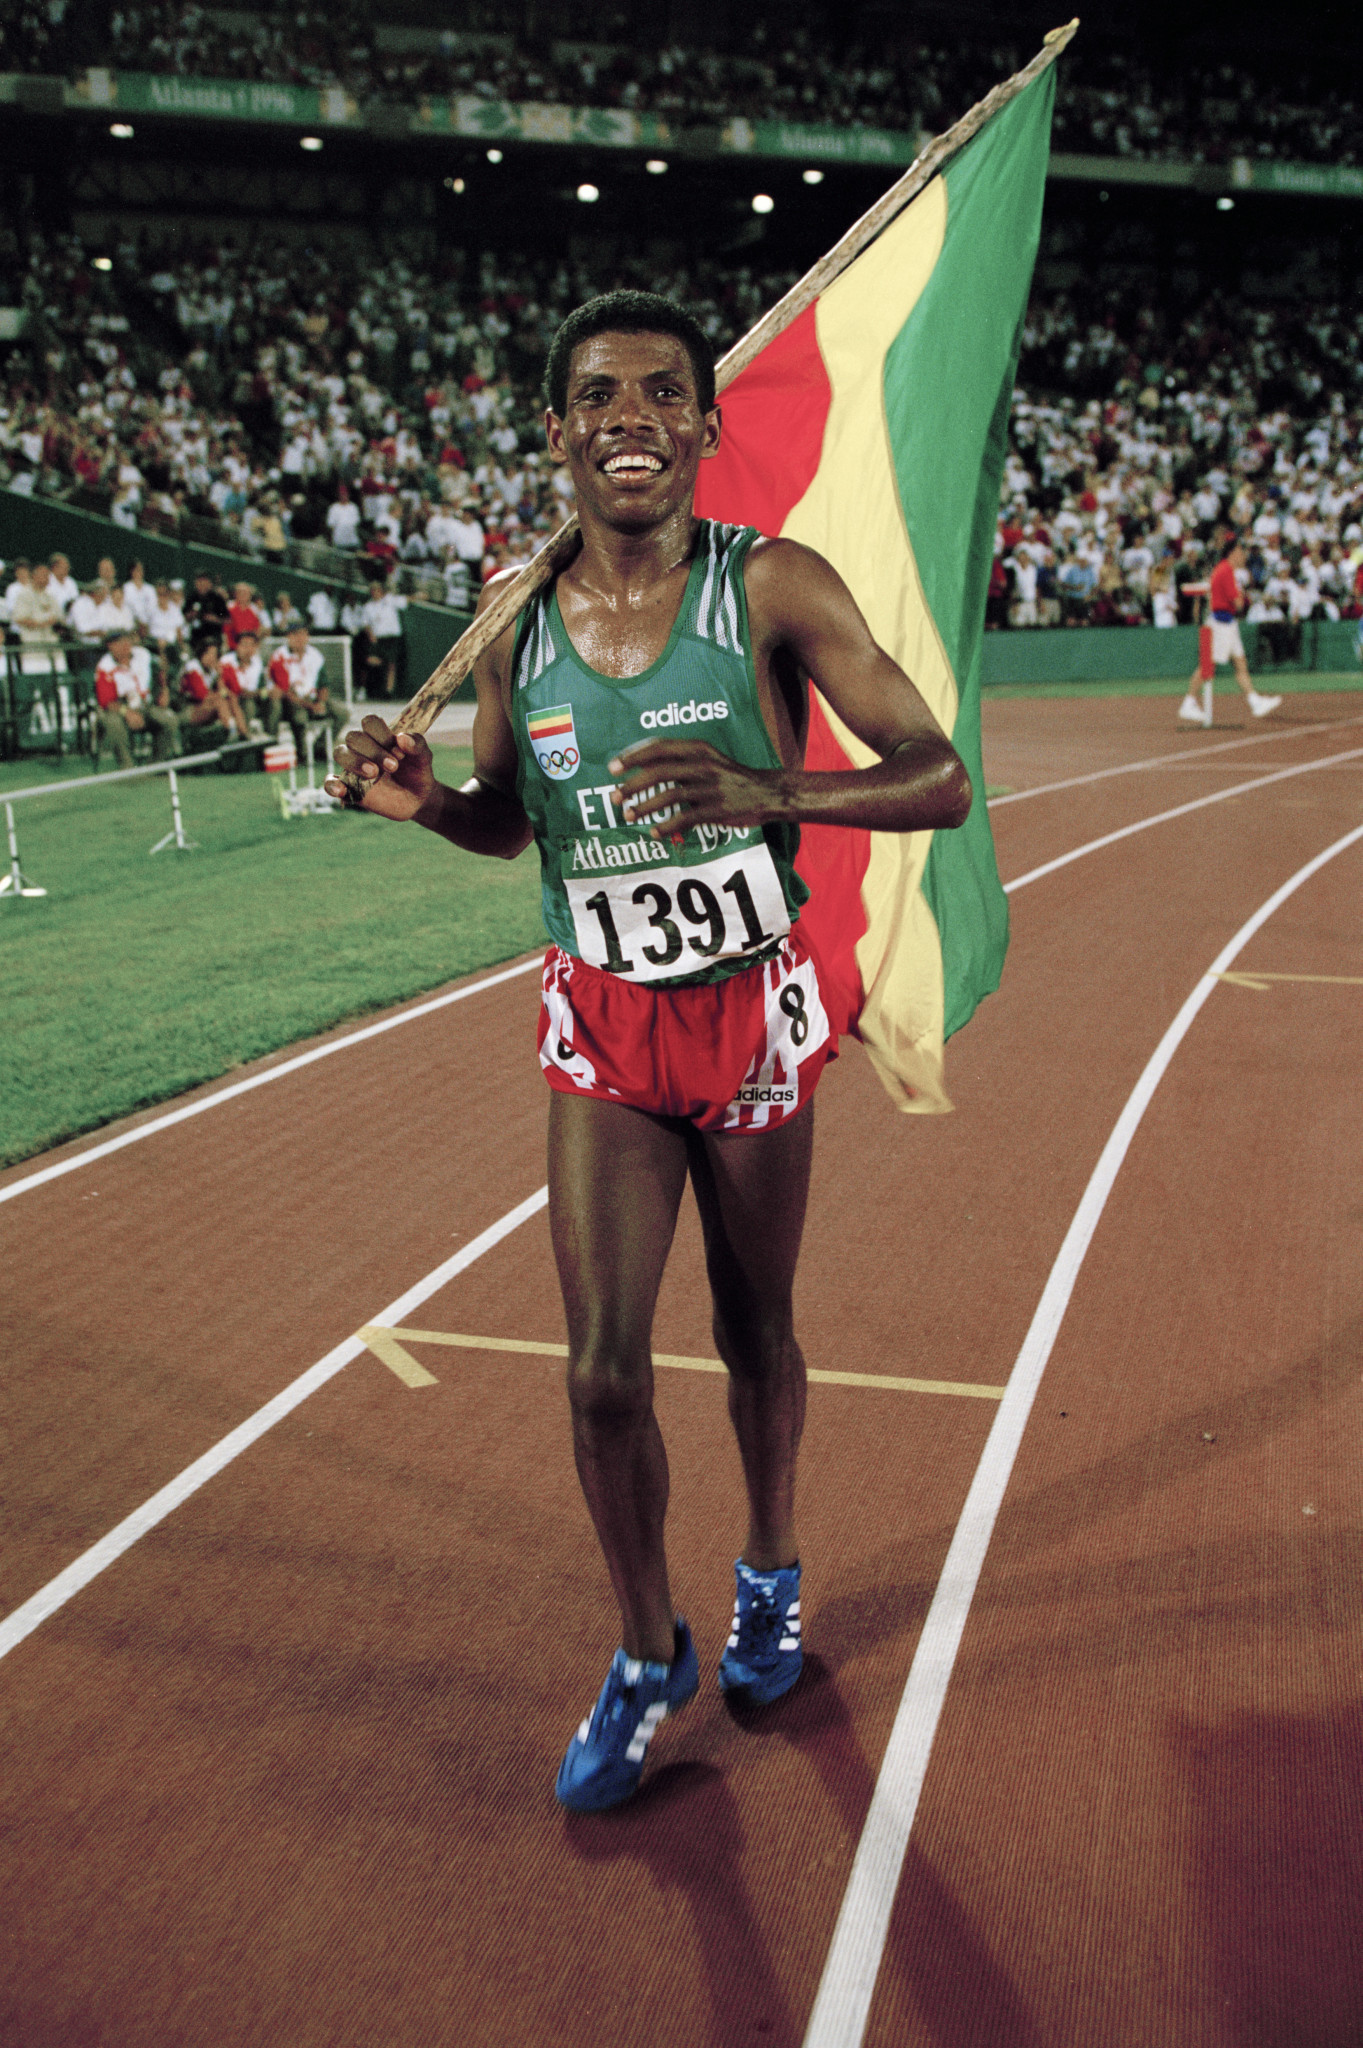 Memorabilia from Ethiopia's multiple world and Olympic champion Haile Gebreselassie, pictured after winning 10,000m gold at the 1996 Atlanta Games, will be among items donated to the new IAAF Heritage department this week at the IAAF World Indoor Championships
©Getty Images
